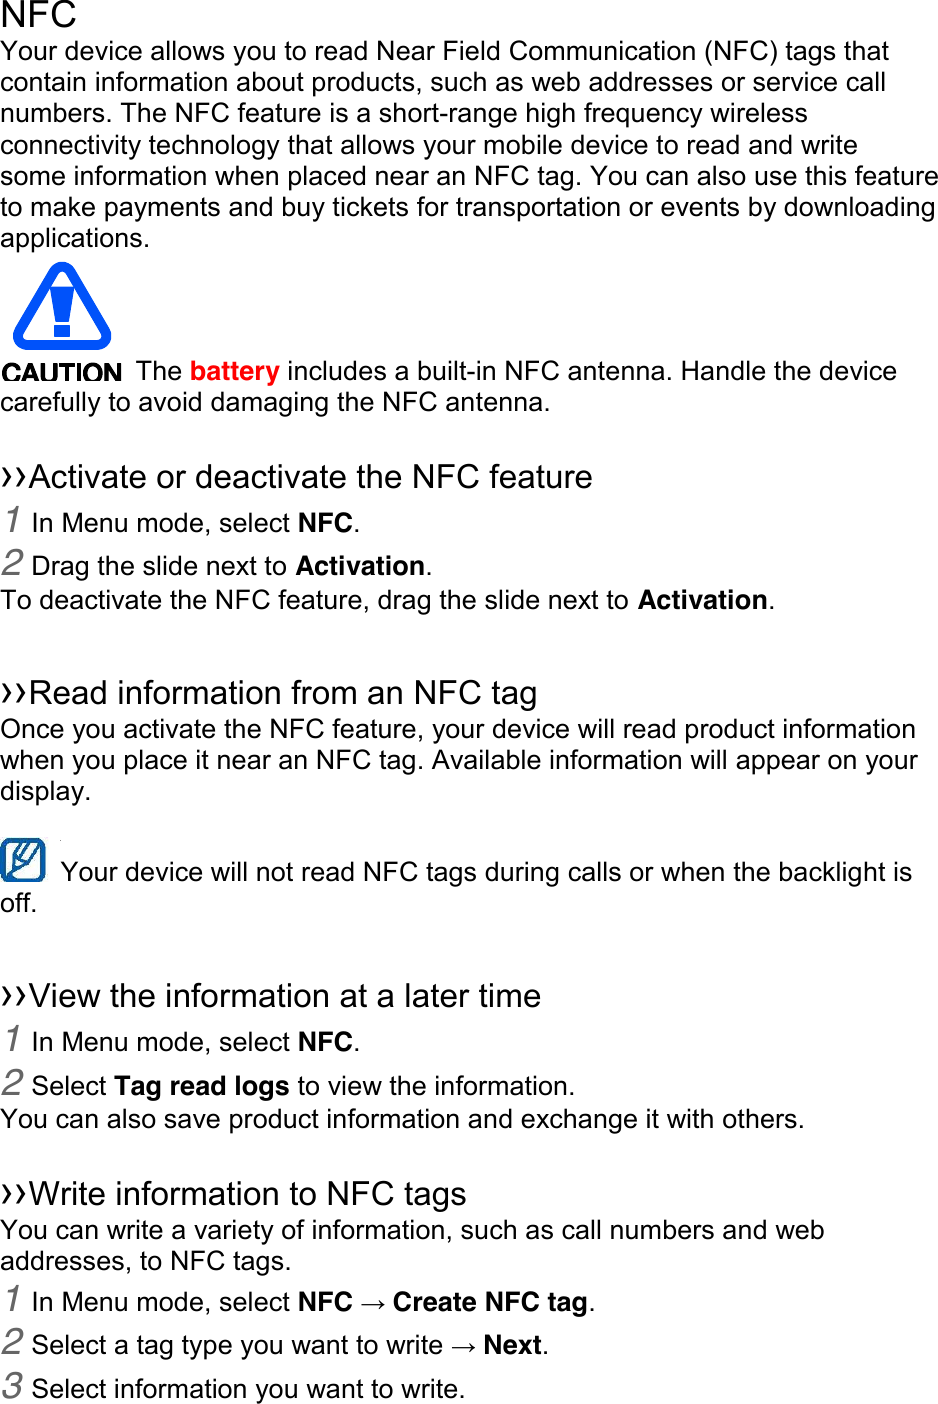 NFC Your device allows you to read Near Field Communication (NFC) tags that contain information about products, such as web addresses or service call numbers. The NFC feature is a short-range high frequency wireless connectivity technology that allows your mobile device to read and write some information when placed near an NFC tag. You can also use this feature to make payments and buy tickets for transportation or events by downloading applications.     The battery includes a built-in NFC antenna. Handle the device carefully to avoid damaging the NFC antenna.  ››Activate or deactivate the NFC feature 1 In Menu mode, select NFC. 2 Drag the slide next to Activation. To deactivate the NFC feature, drag the slide next to Activation.  ››Read information from an NFC tag Once you activate the NFC feature, your device will read product information when you place it near an NFC tag. Available information will appear on your display.  Your device will not read NFC tags during calls or when the backlight is   off.  ››View the information at a later time 1 In Menu mode, select NFC. 2 Select Tag read logs to view the information. You can also save product information and exchange it with others.  ››Write information to NFC tags   You can write a variety of information, such as call numbers and web addresses, to NFC tags. 1 In Menu mode, select NFC →Create NFC tag. 2 Select a tag type you want to write →Next. 3 Select information you want to write. 